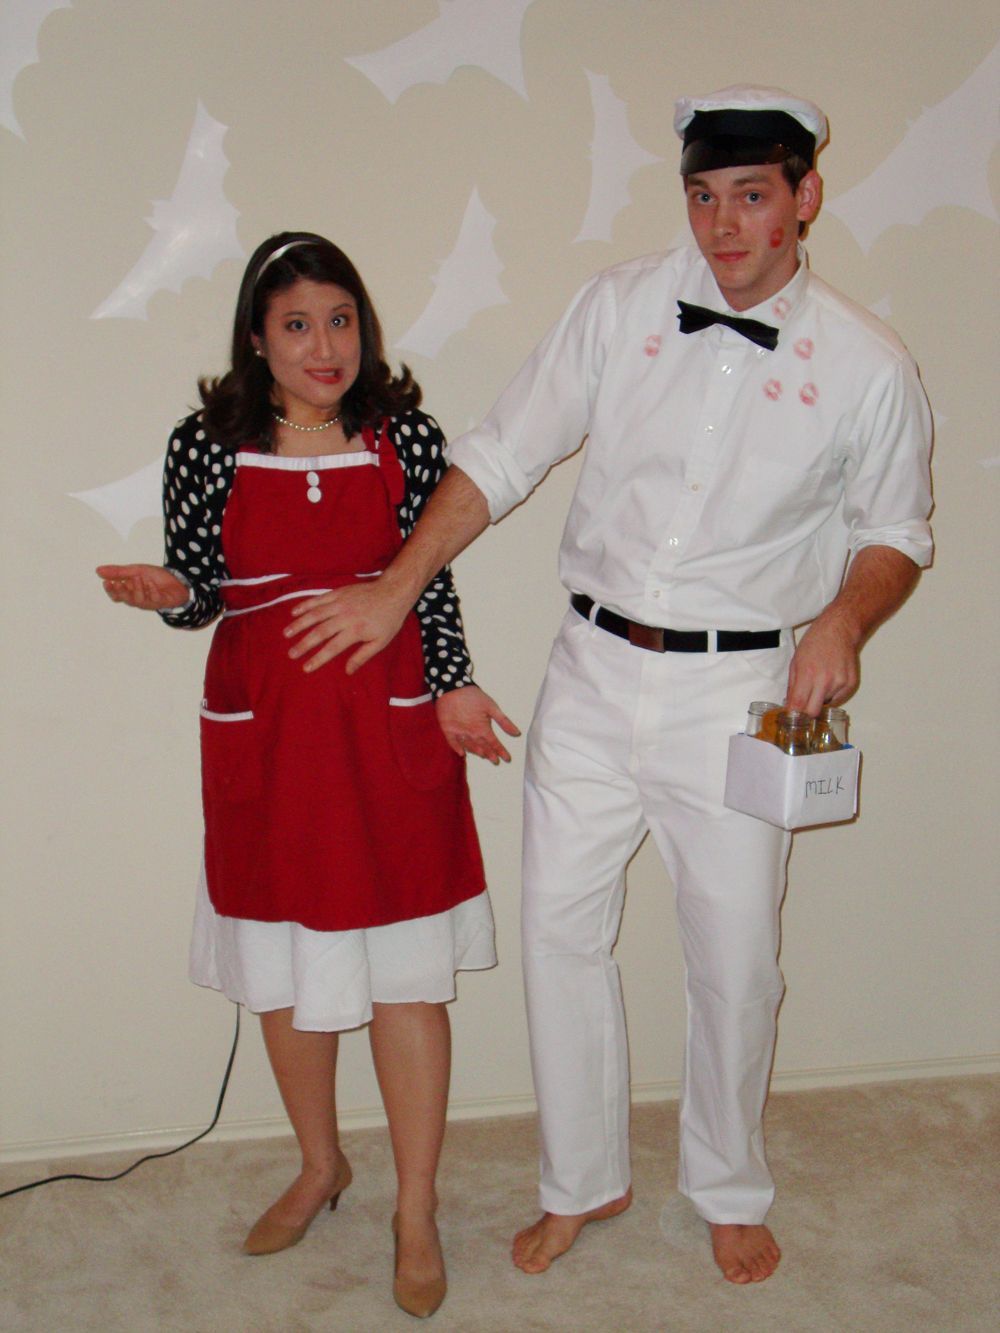 Milk man and 50s pregnant lady costume.  Too funny